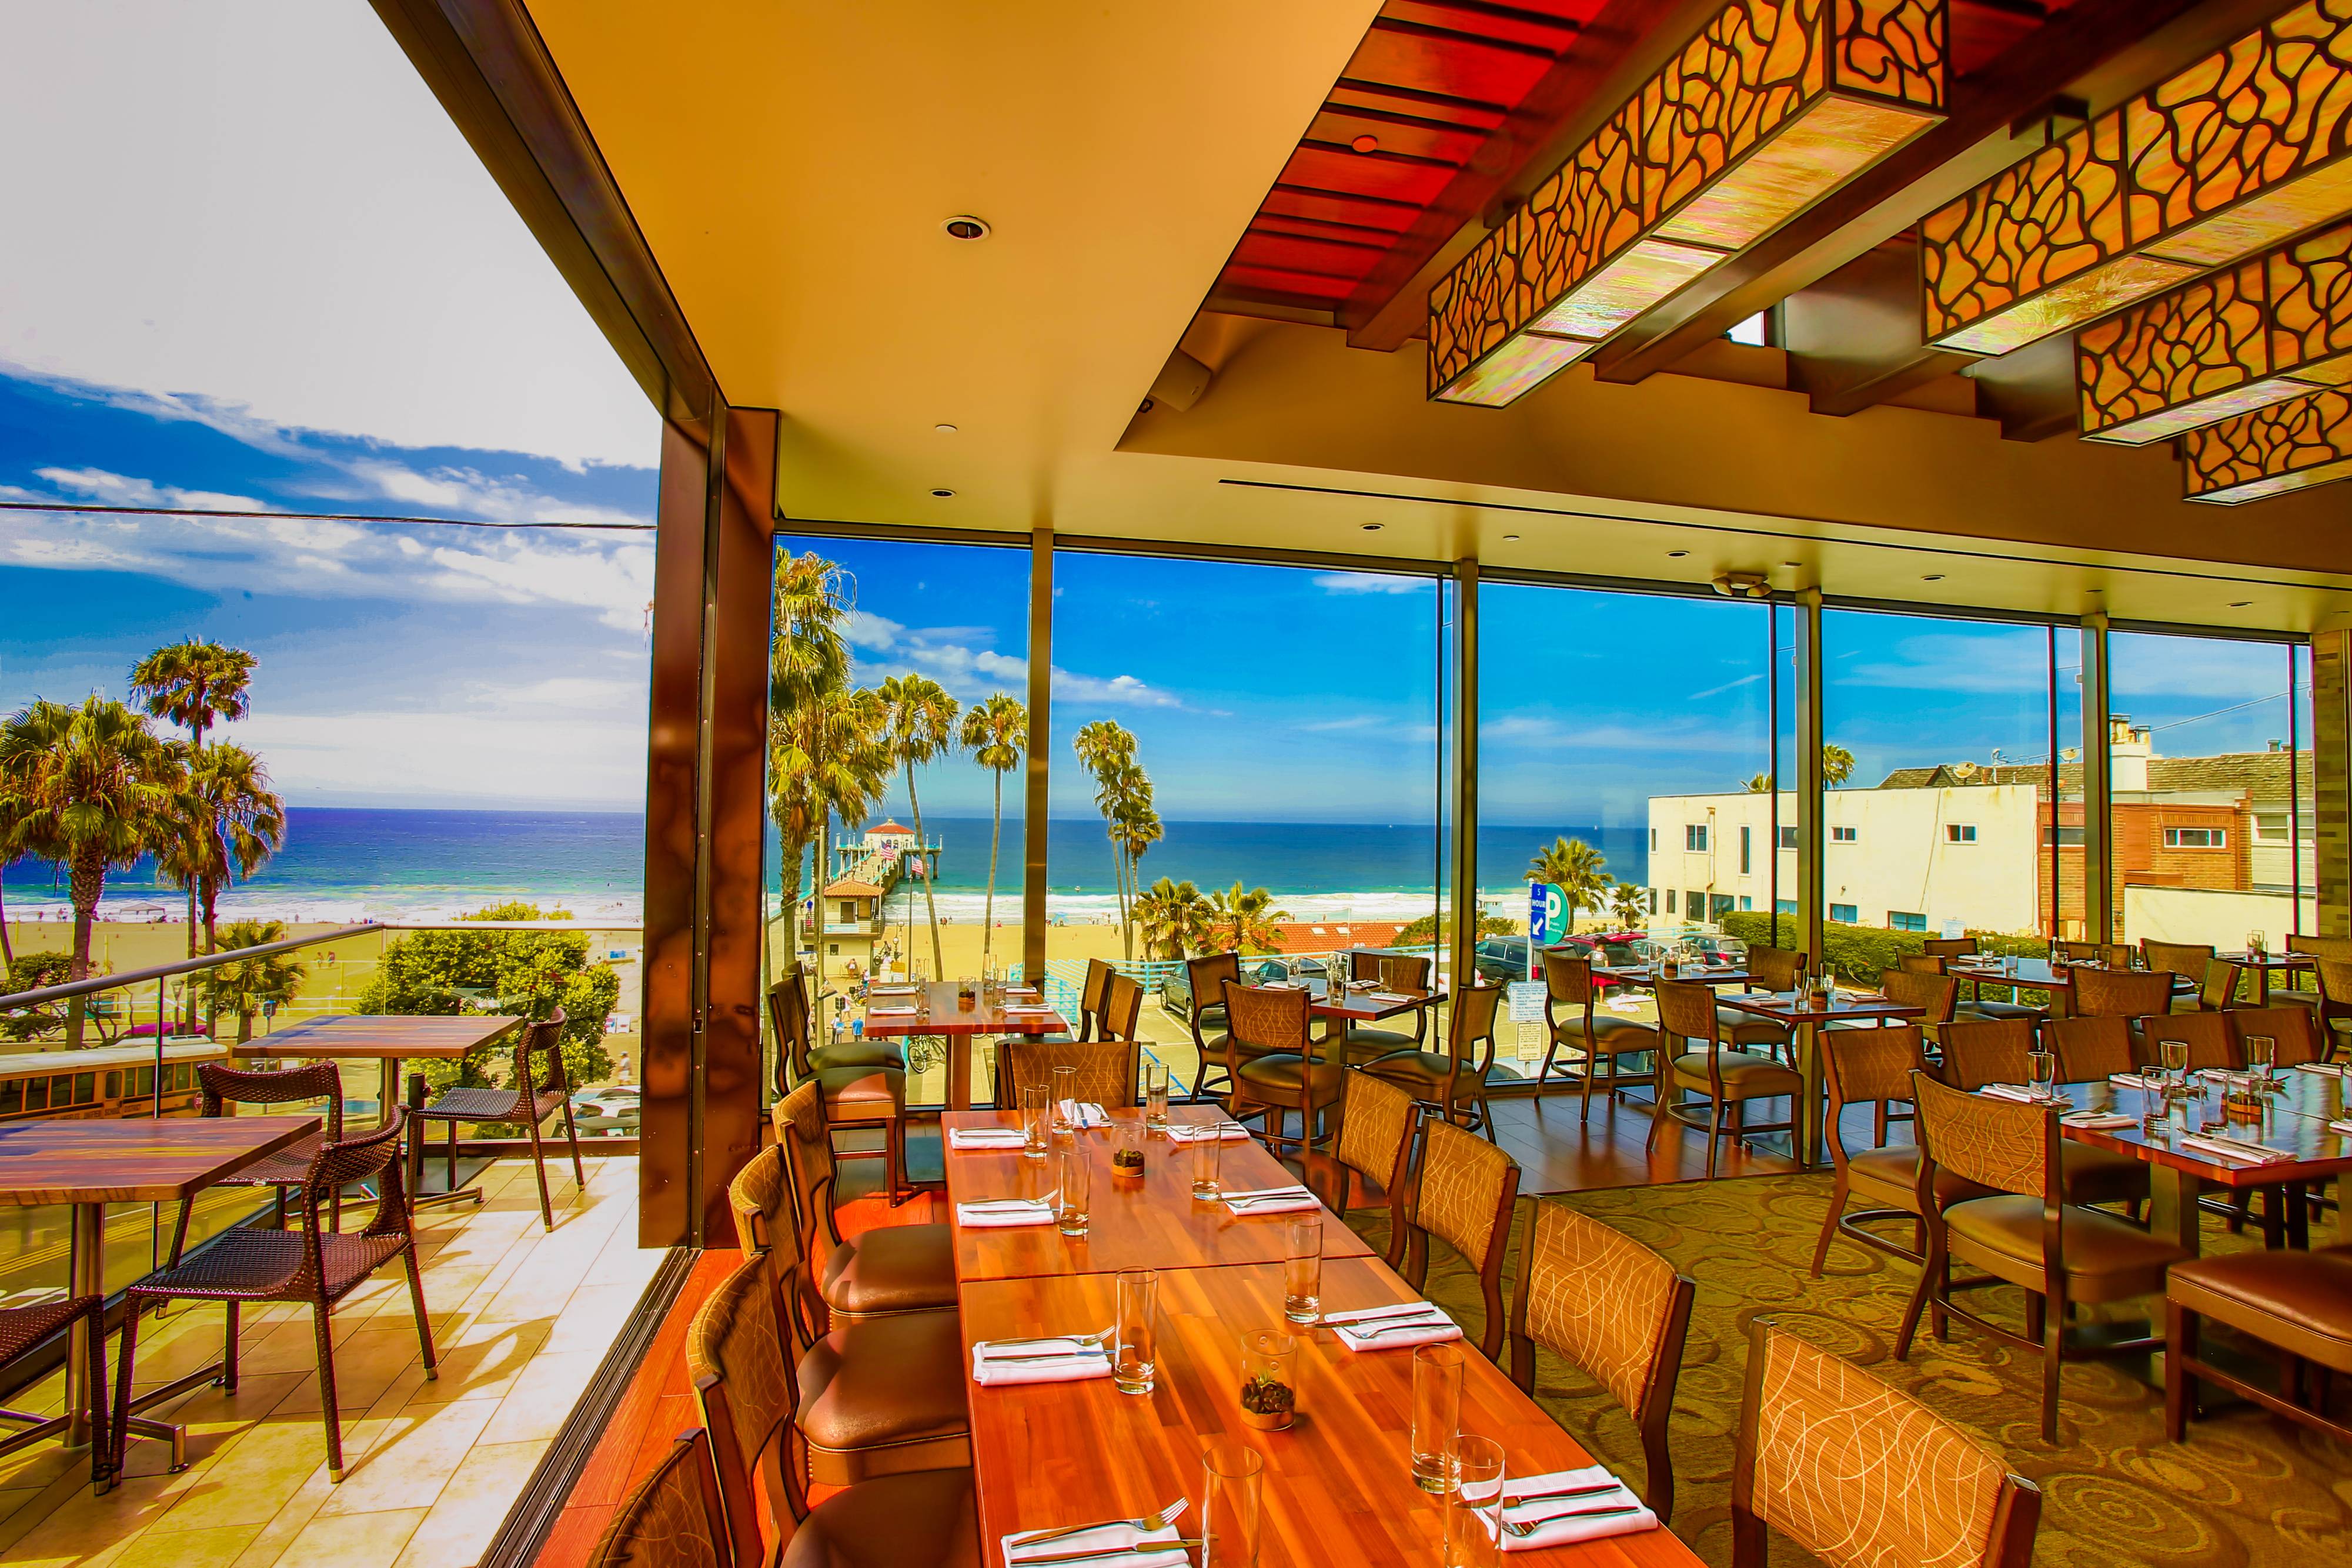 The 5 Best Spots To Lunch With A View in LA